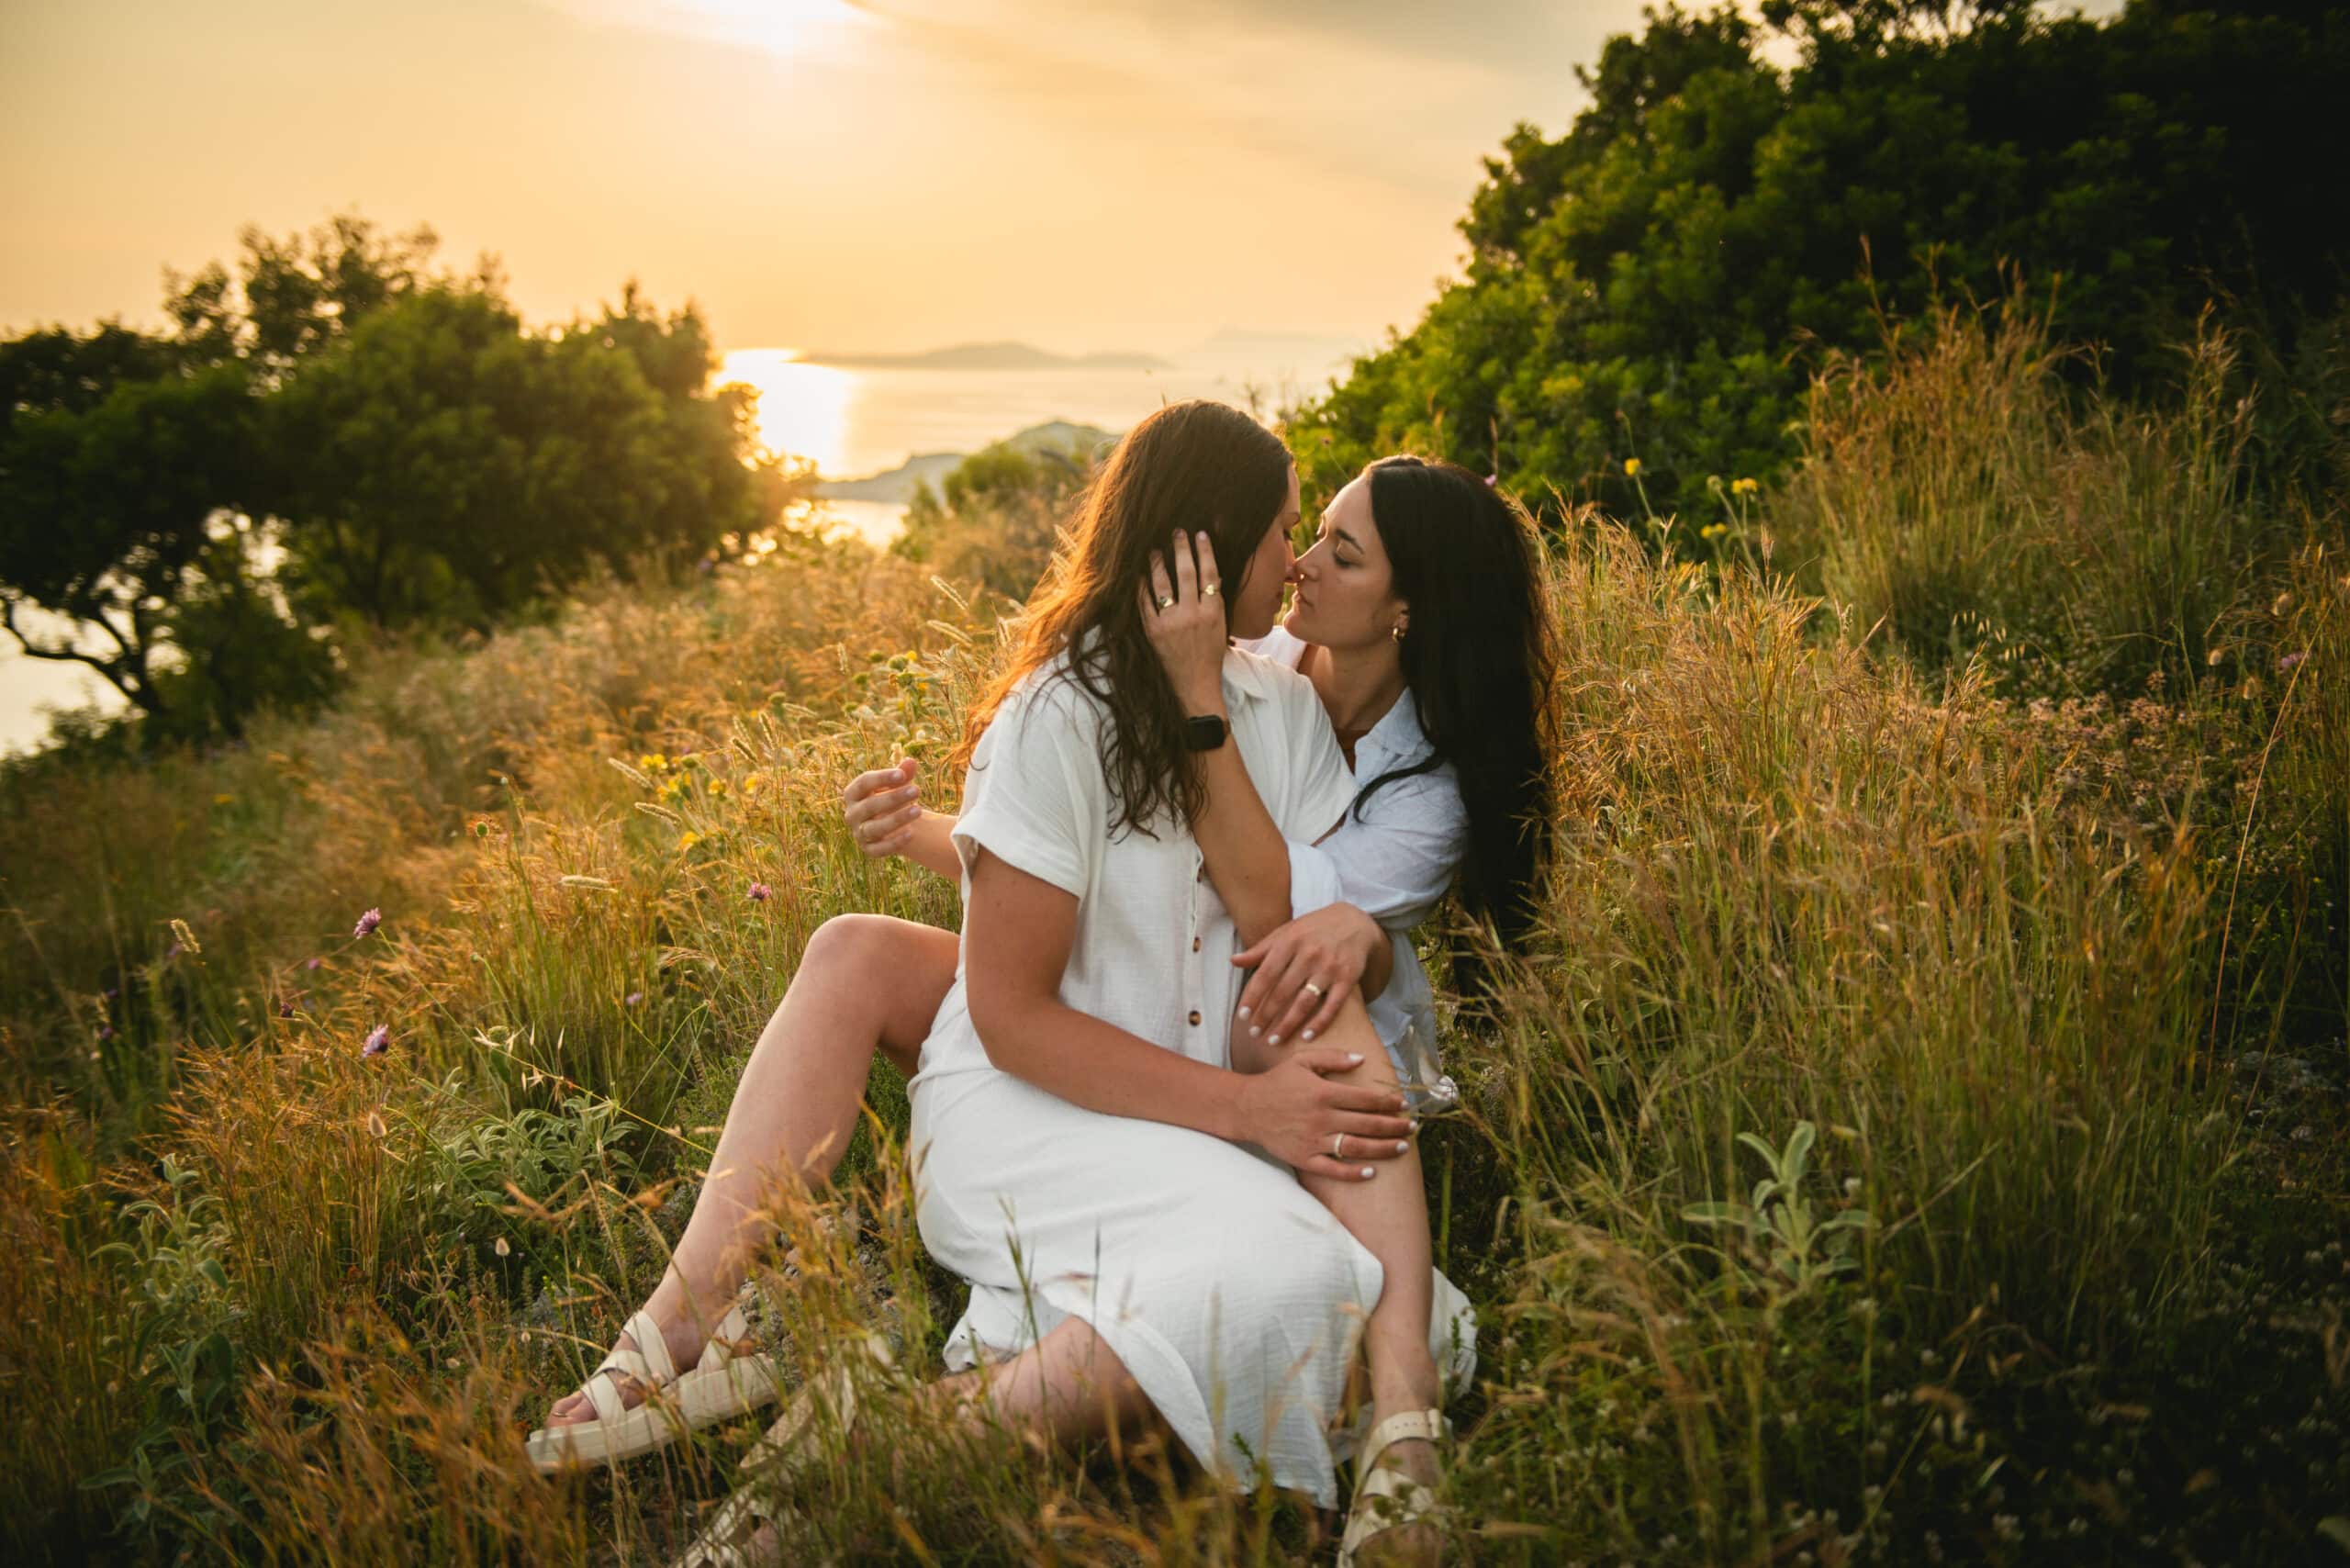 Brides sharing a passionate kiss in the lush grass, capturing their love in Corfu's natural beauty.